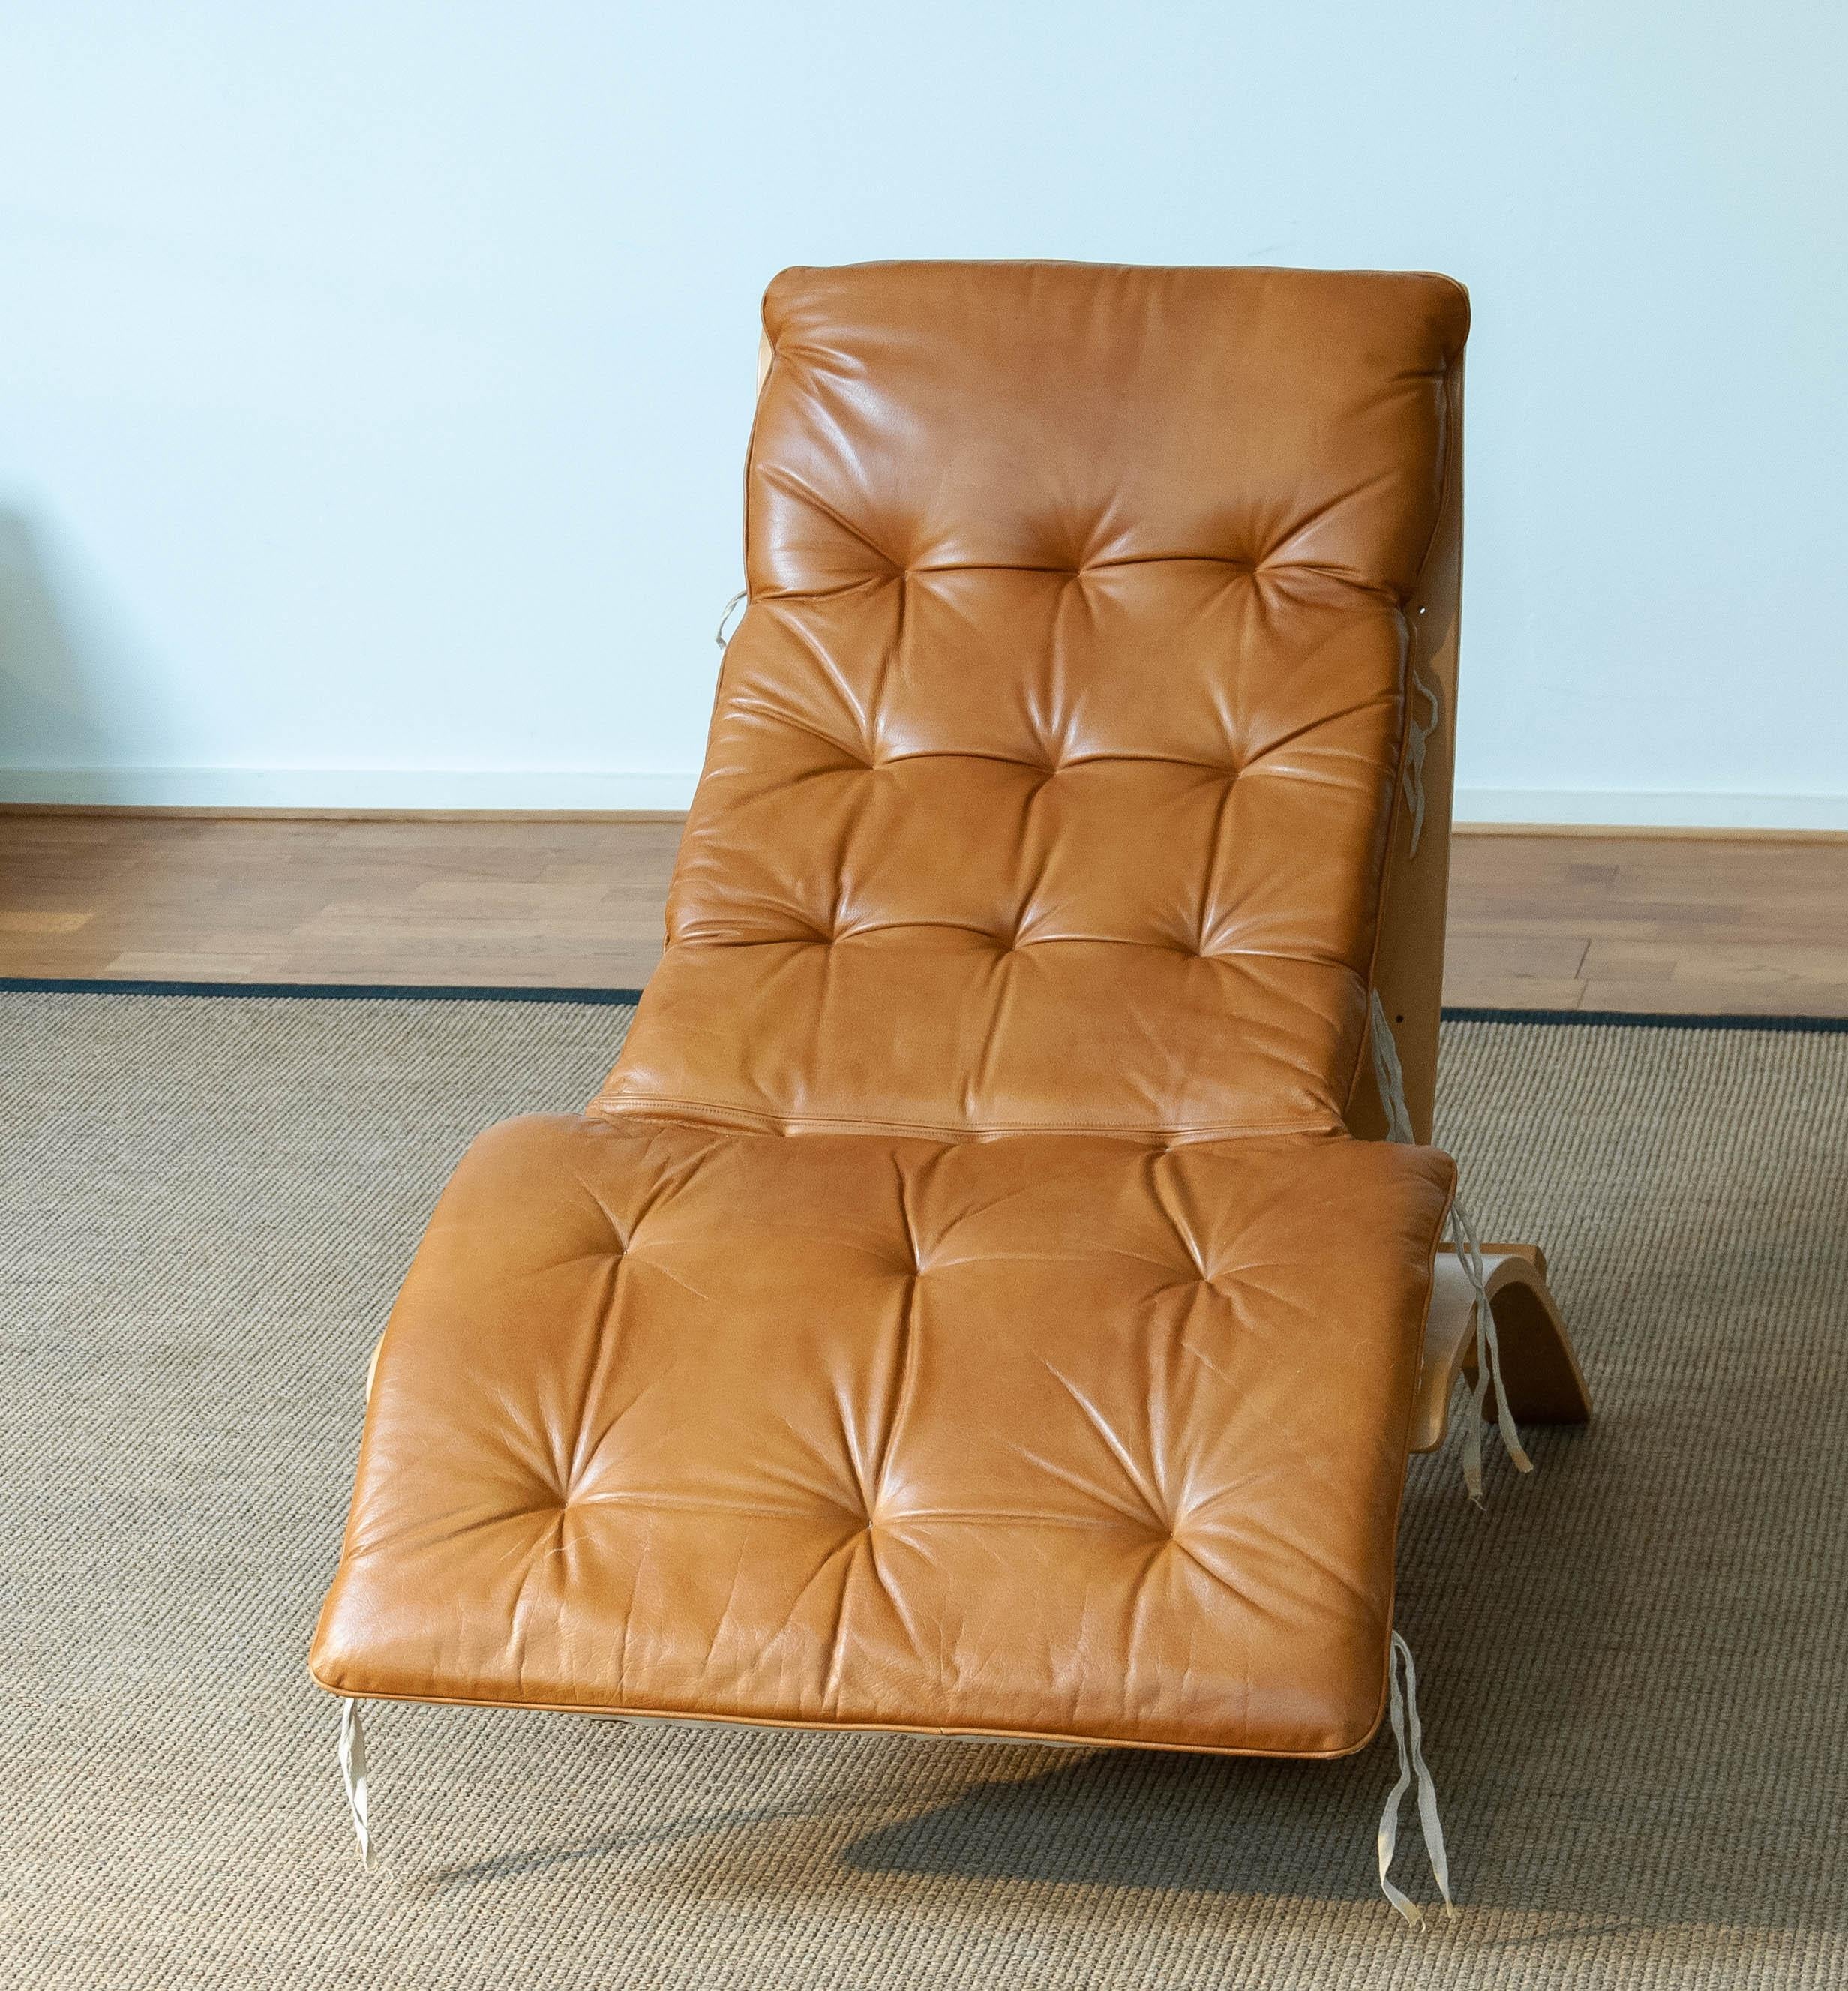 1970's Beech Bentwood with Cognac Leather Folding Lounge Chair by Nelo, Sweden For Sale 1